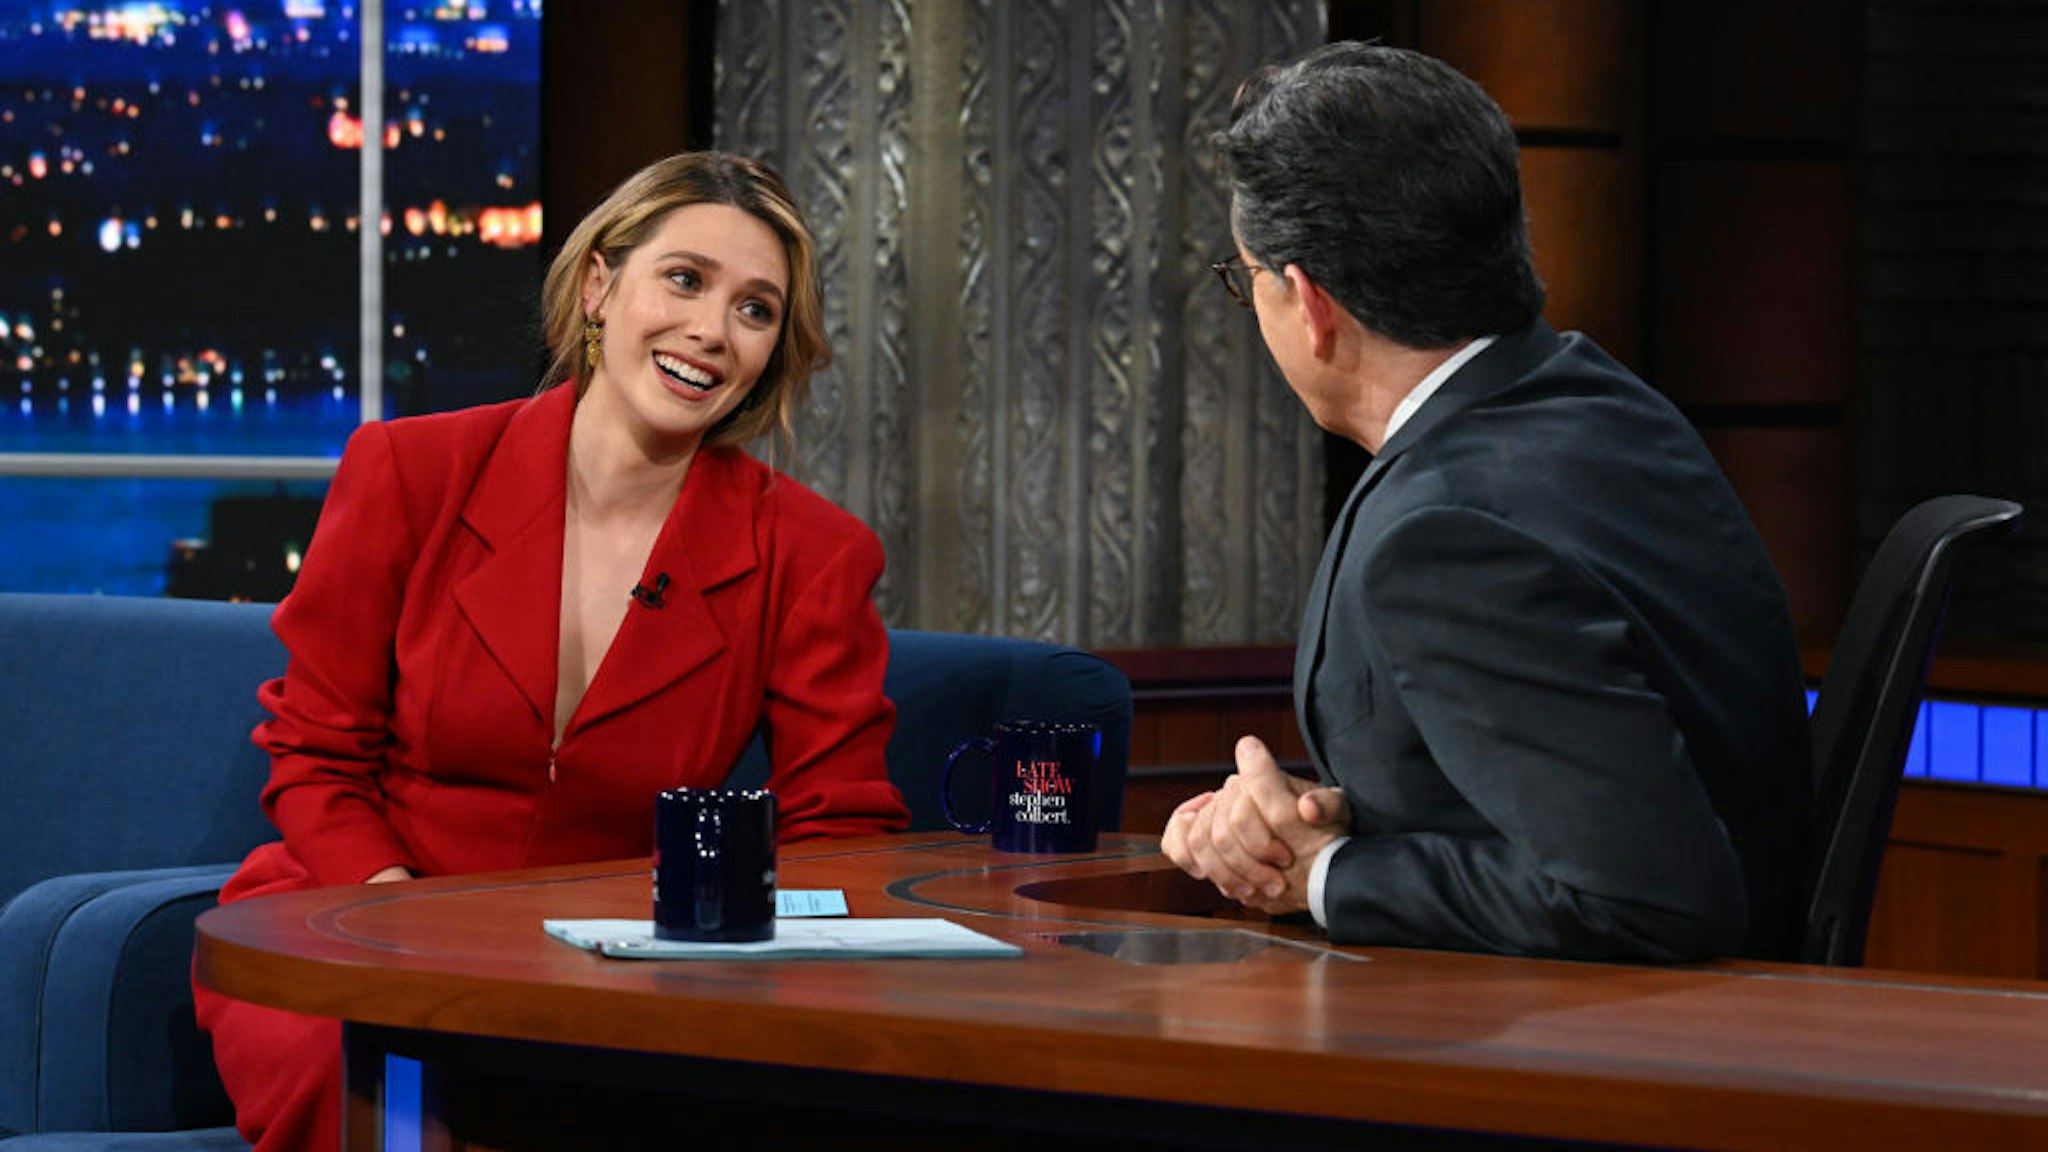 NEW YORK - APRIL 19: The Late Show with Stephen Colbert and guest Elizabeth Olsen during Wednesday's April 19, 2023 show. (Photo by Scott Kowalchyk/CBS via Getty Images)